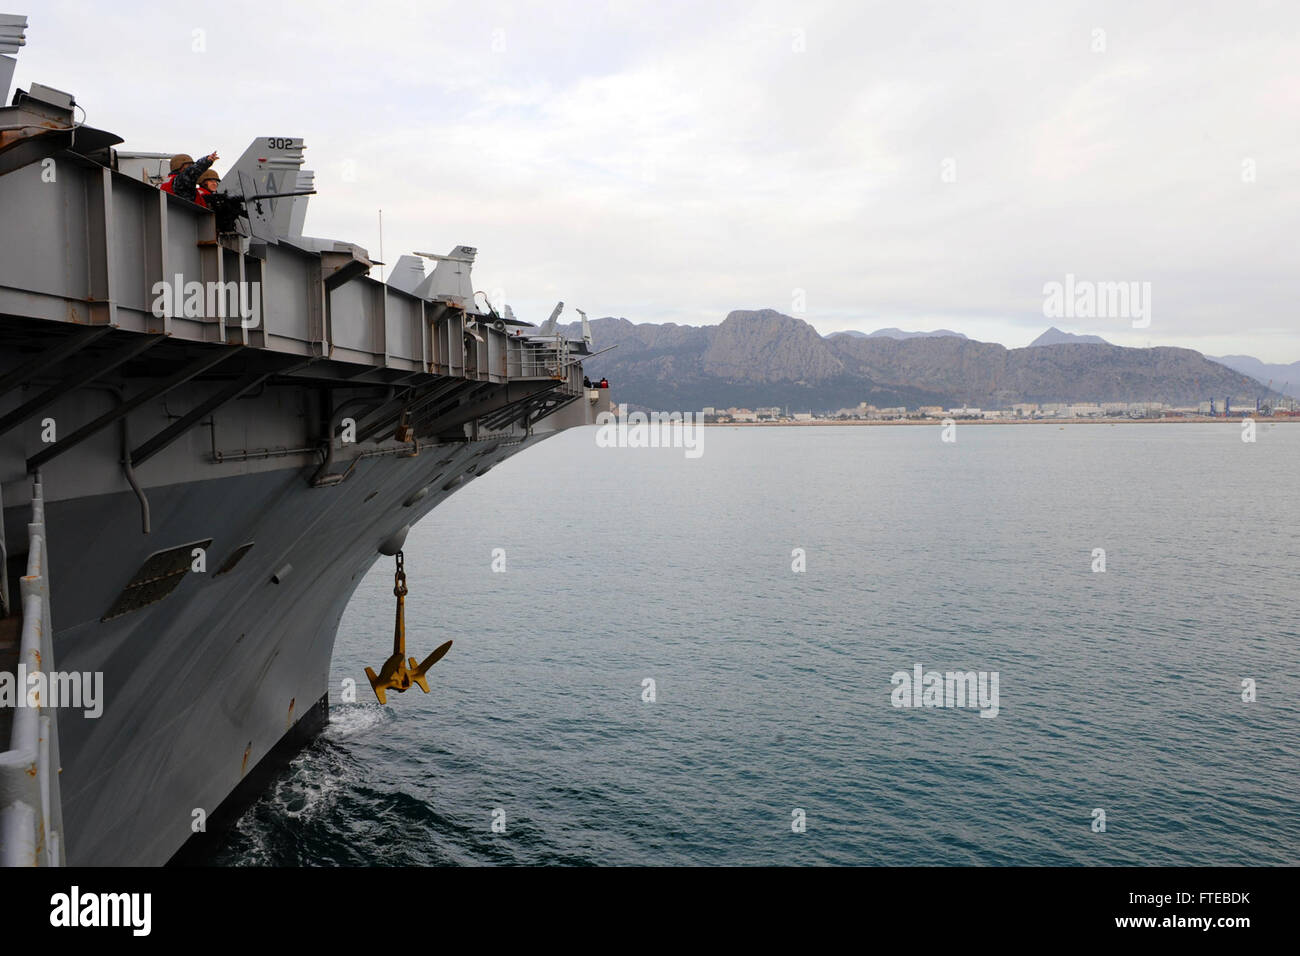 140309-N-CZ979-098 ANTALYA, Turkey (Mar. 9, 2014) The aircraft carrier USS George H.W. Bush (CVN 77) drops anchor in Antalya, Turkey. George H. W. Bush is on a scheduled deployment supporting maritime security operations and theater security cooperation efforts in the U.S. 6th Fleet area of operations.  (U.S. Navy photo by Mass Communication Specialist 3rd Class Joshua Card/Released) Stock Photo